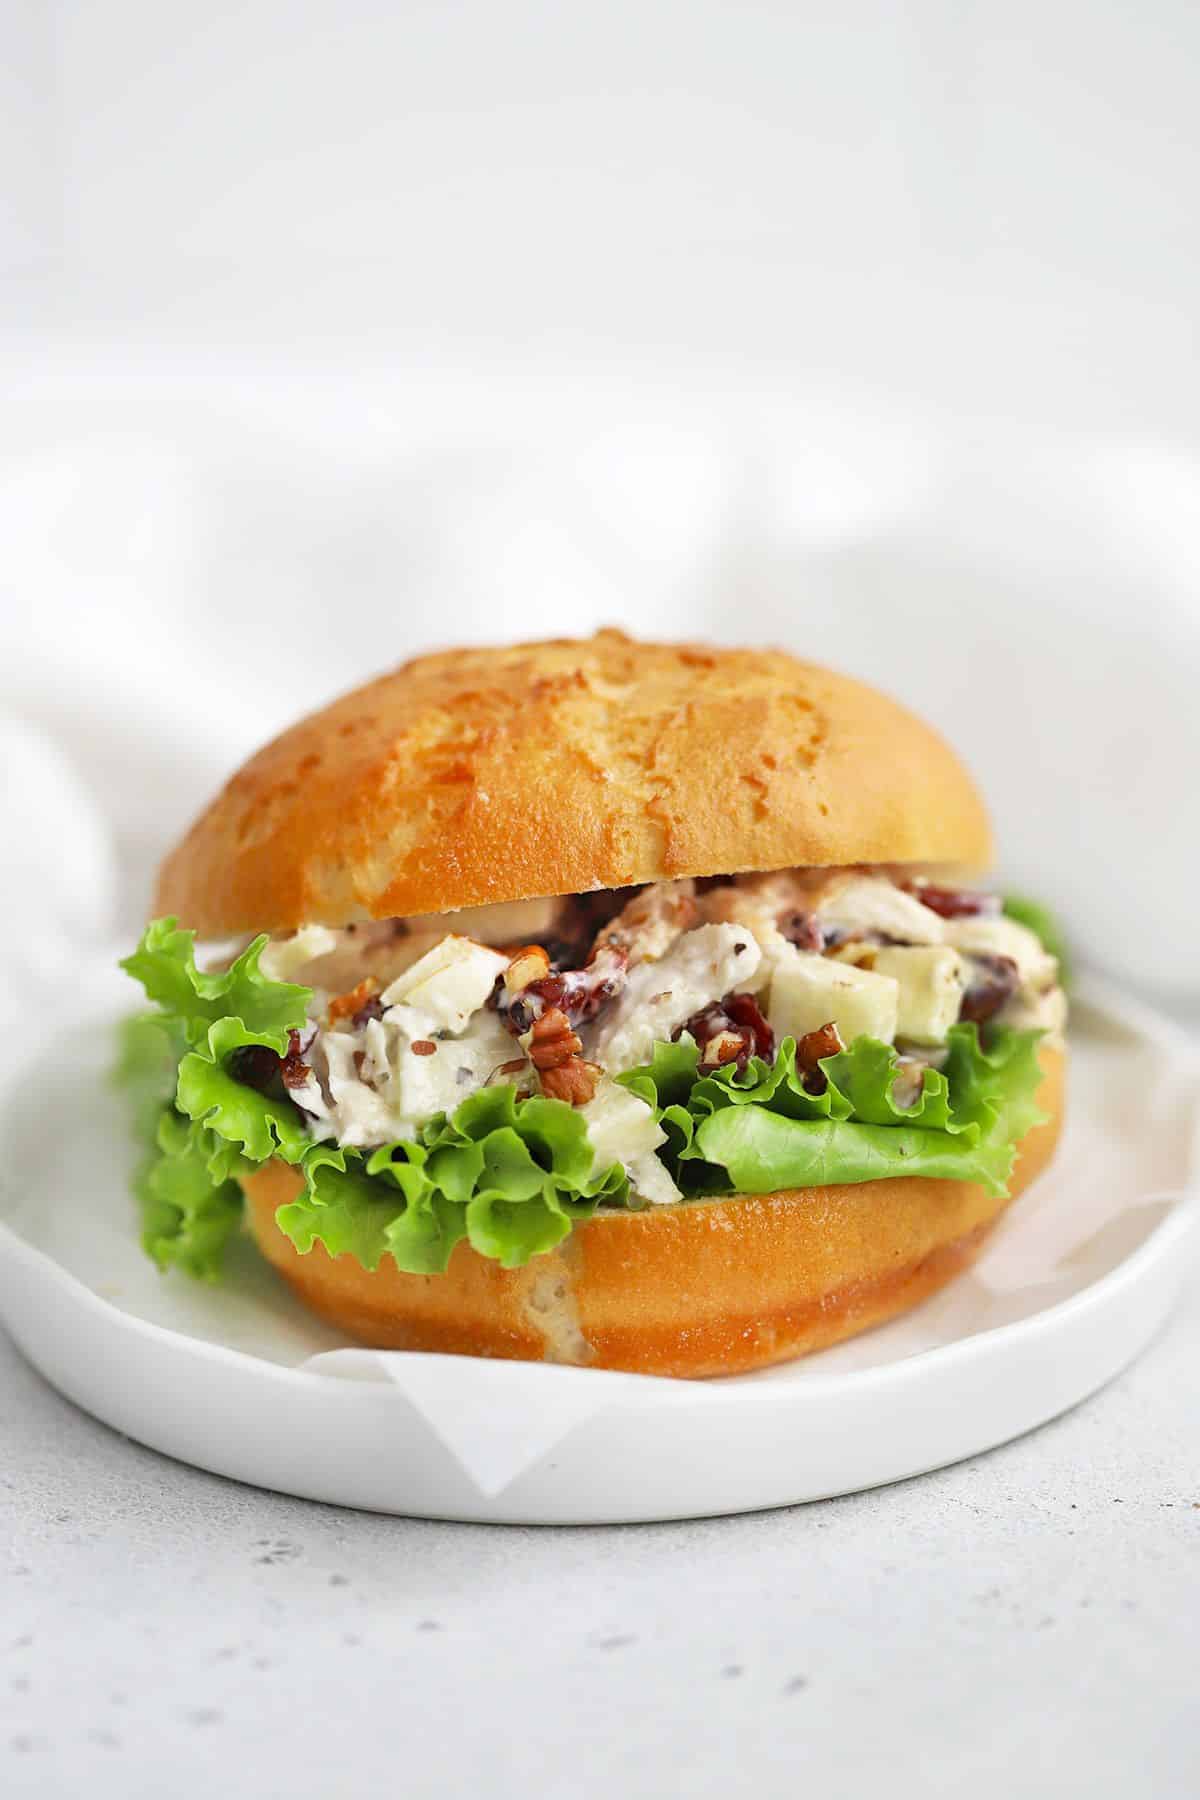 Apple Cranberry Chicken Salad in a burker on a white plate.